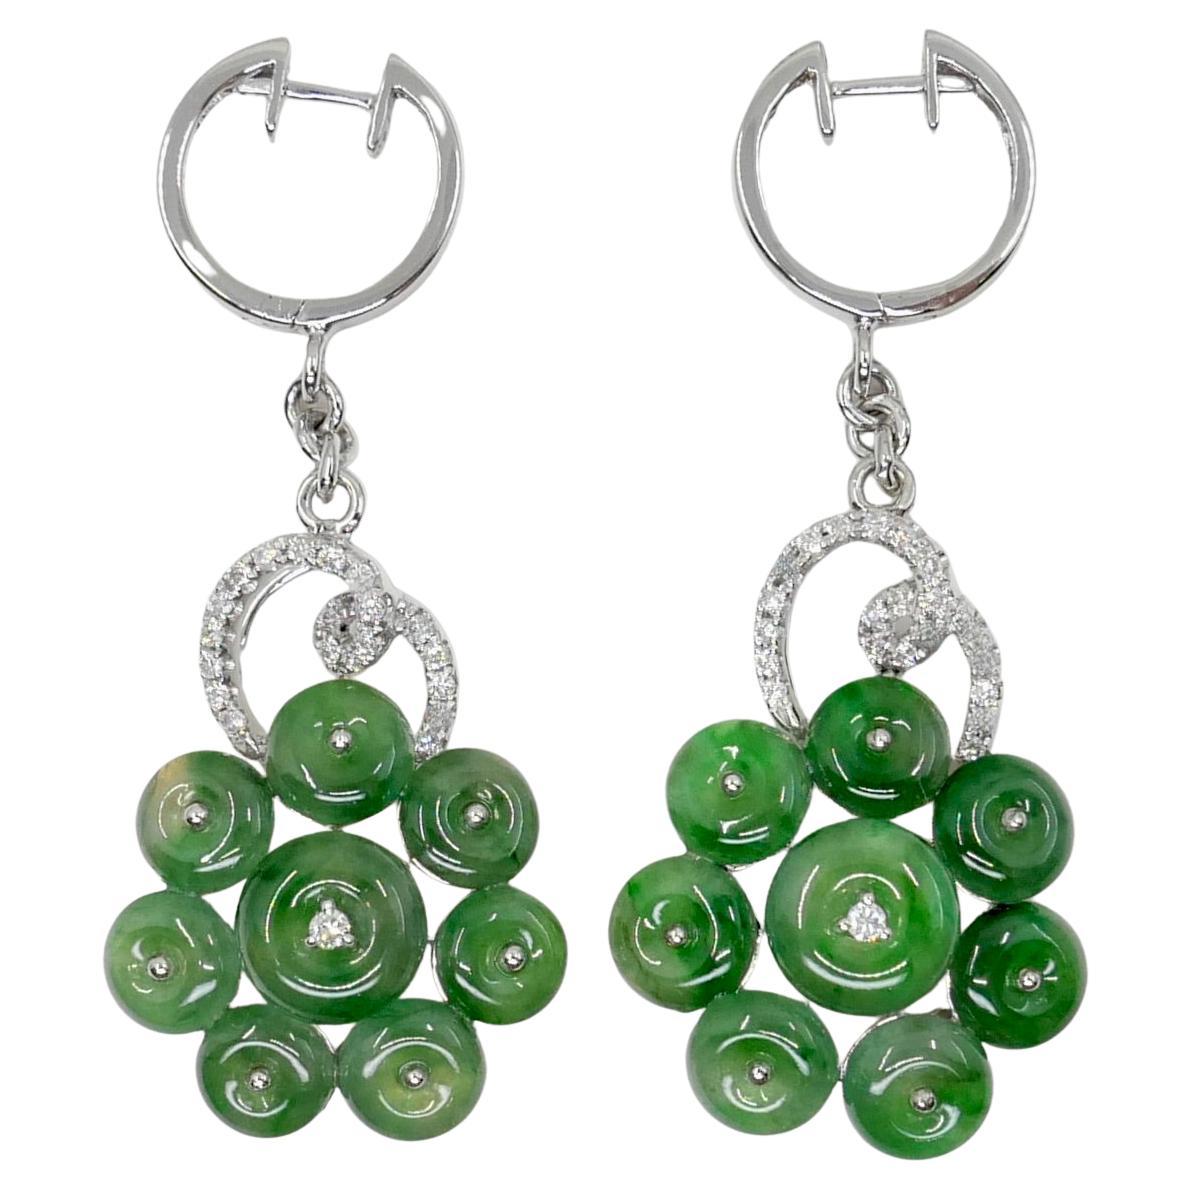 Certified Type A Cluster Icy Jade Discs & Diamond Earrings, High Translucency